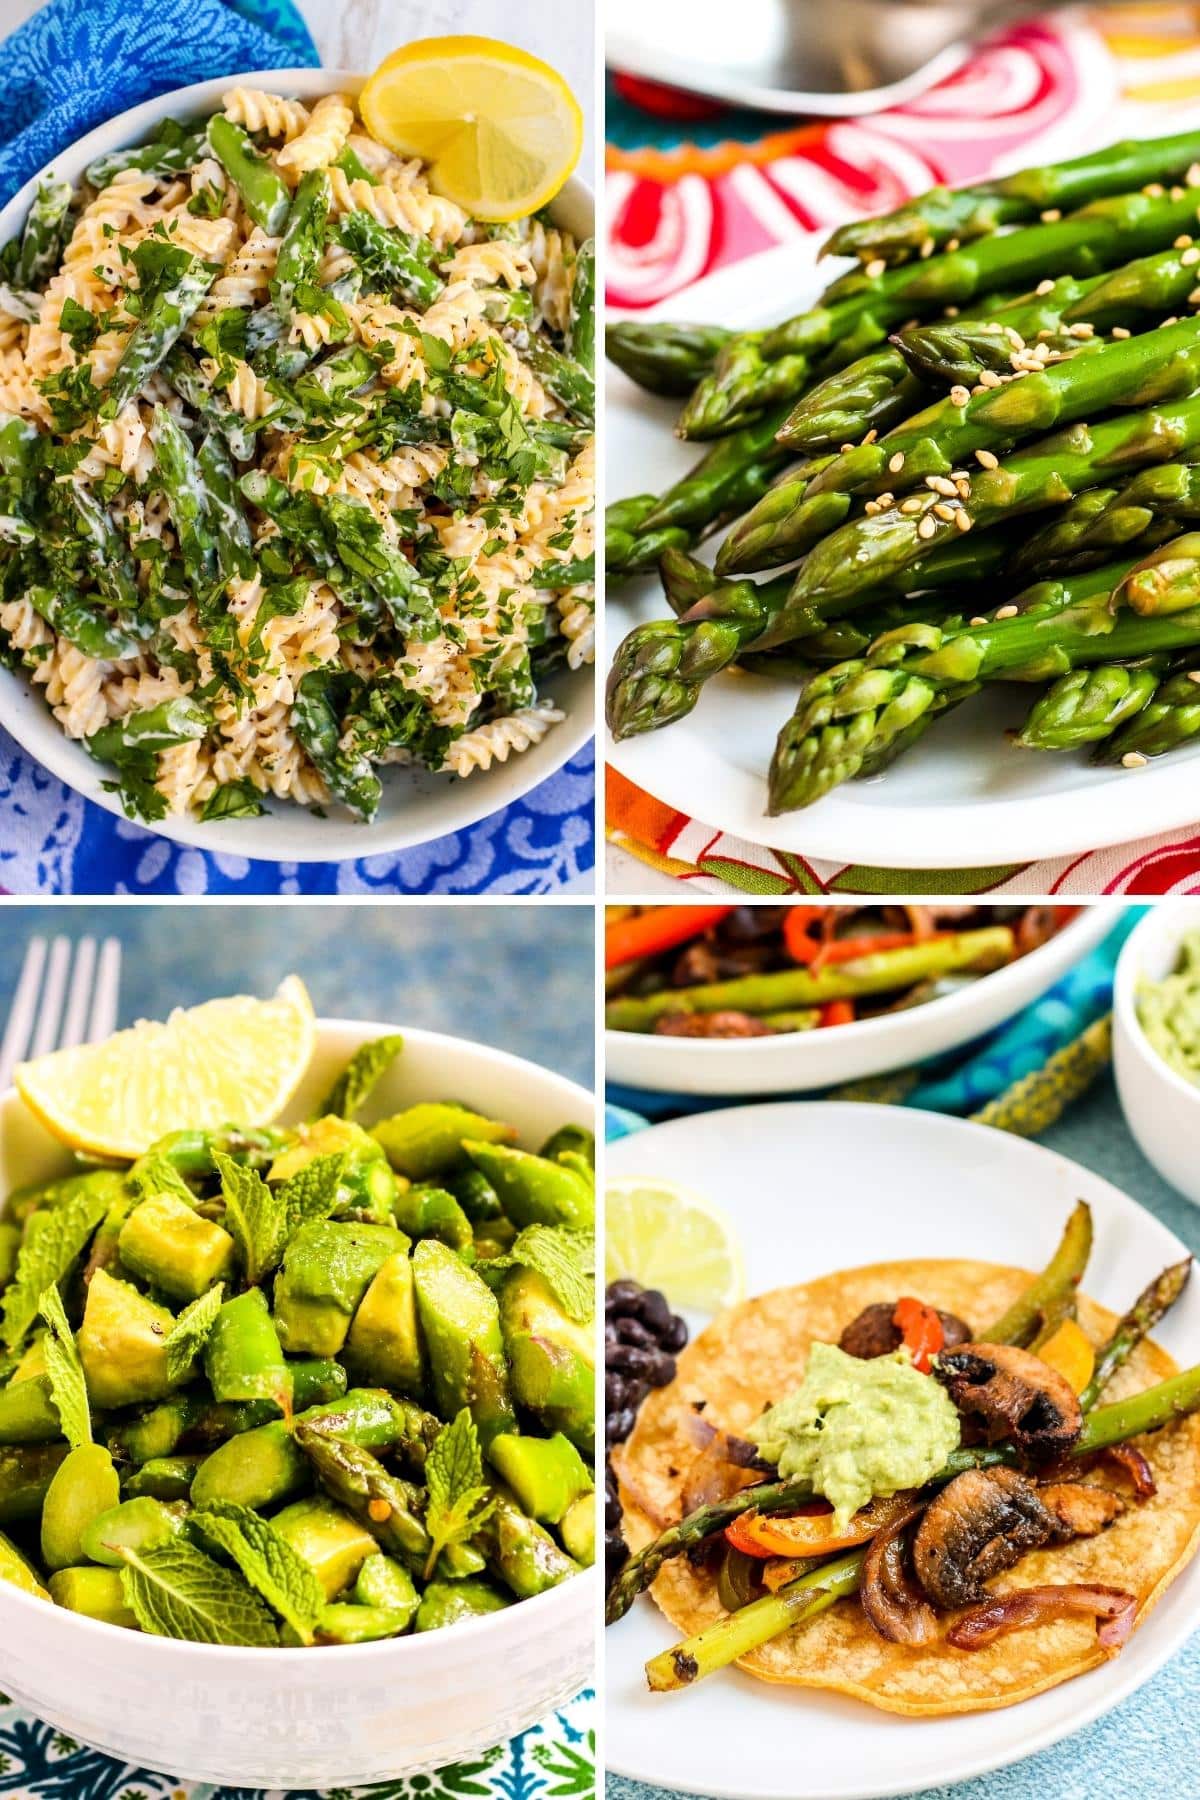 Creamy pasta with asparagus, asparagus topped with sesame seeds, asparagus and avocado salad, and tortilla with roasted vegetables and dollop of guacamole.